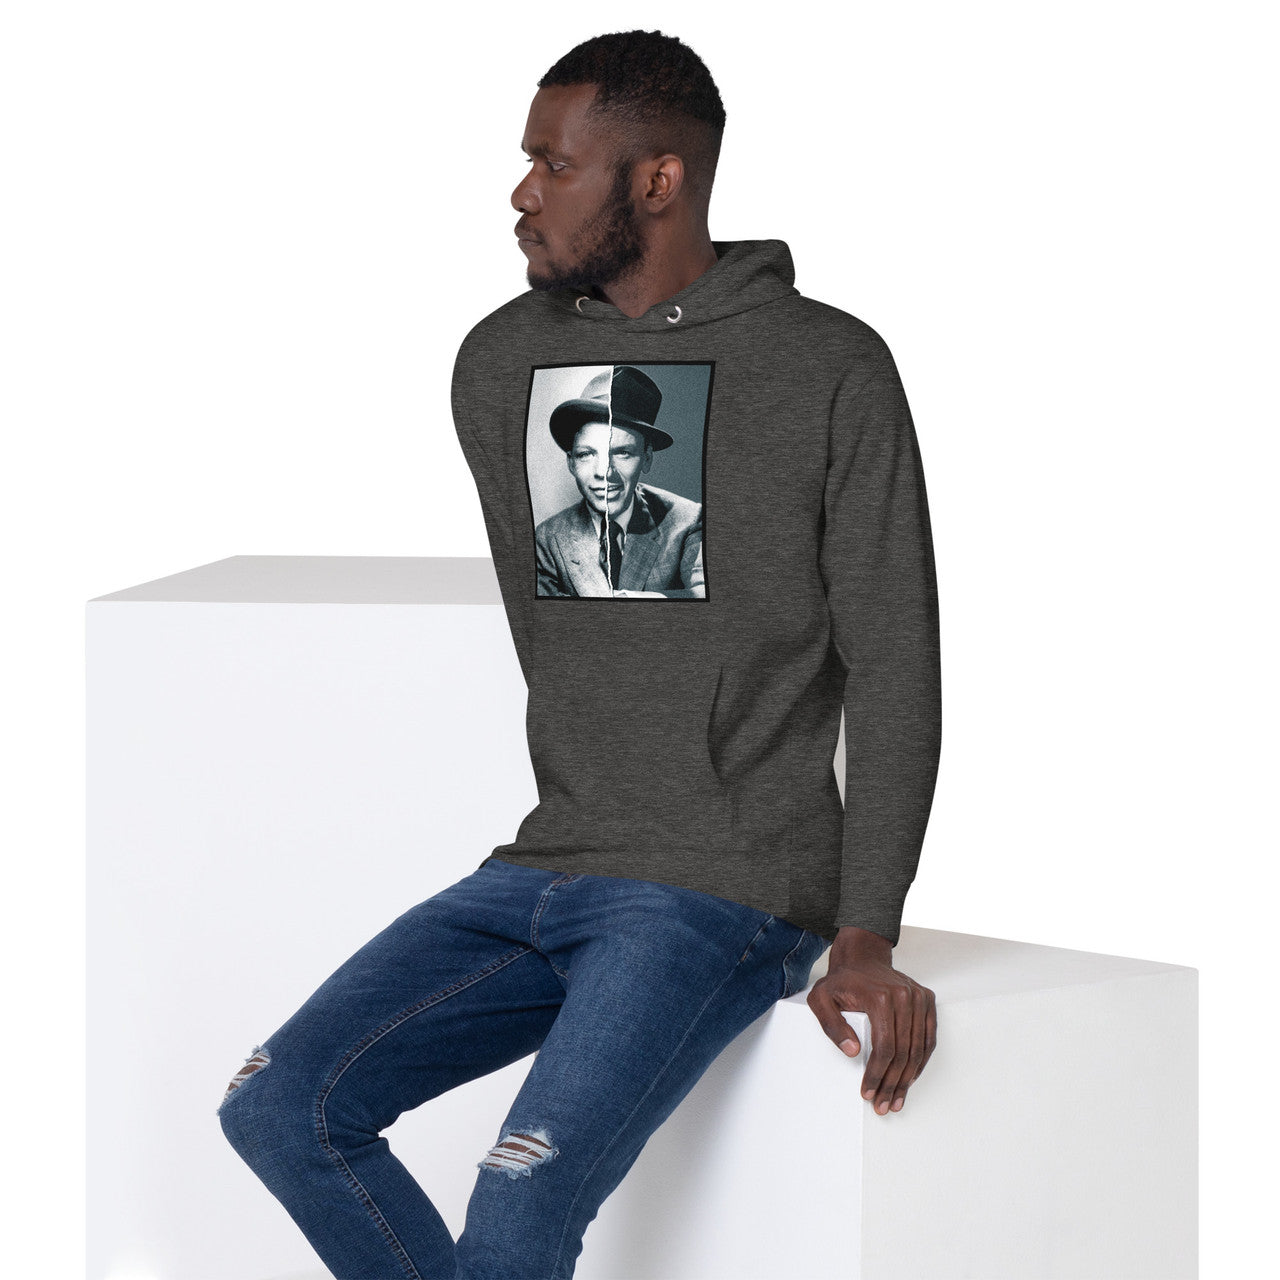 Sinatra KiSS Unisex Hoodie - Frank Rat Pack young and old Hollywood